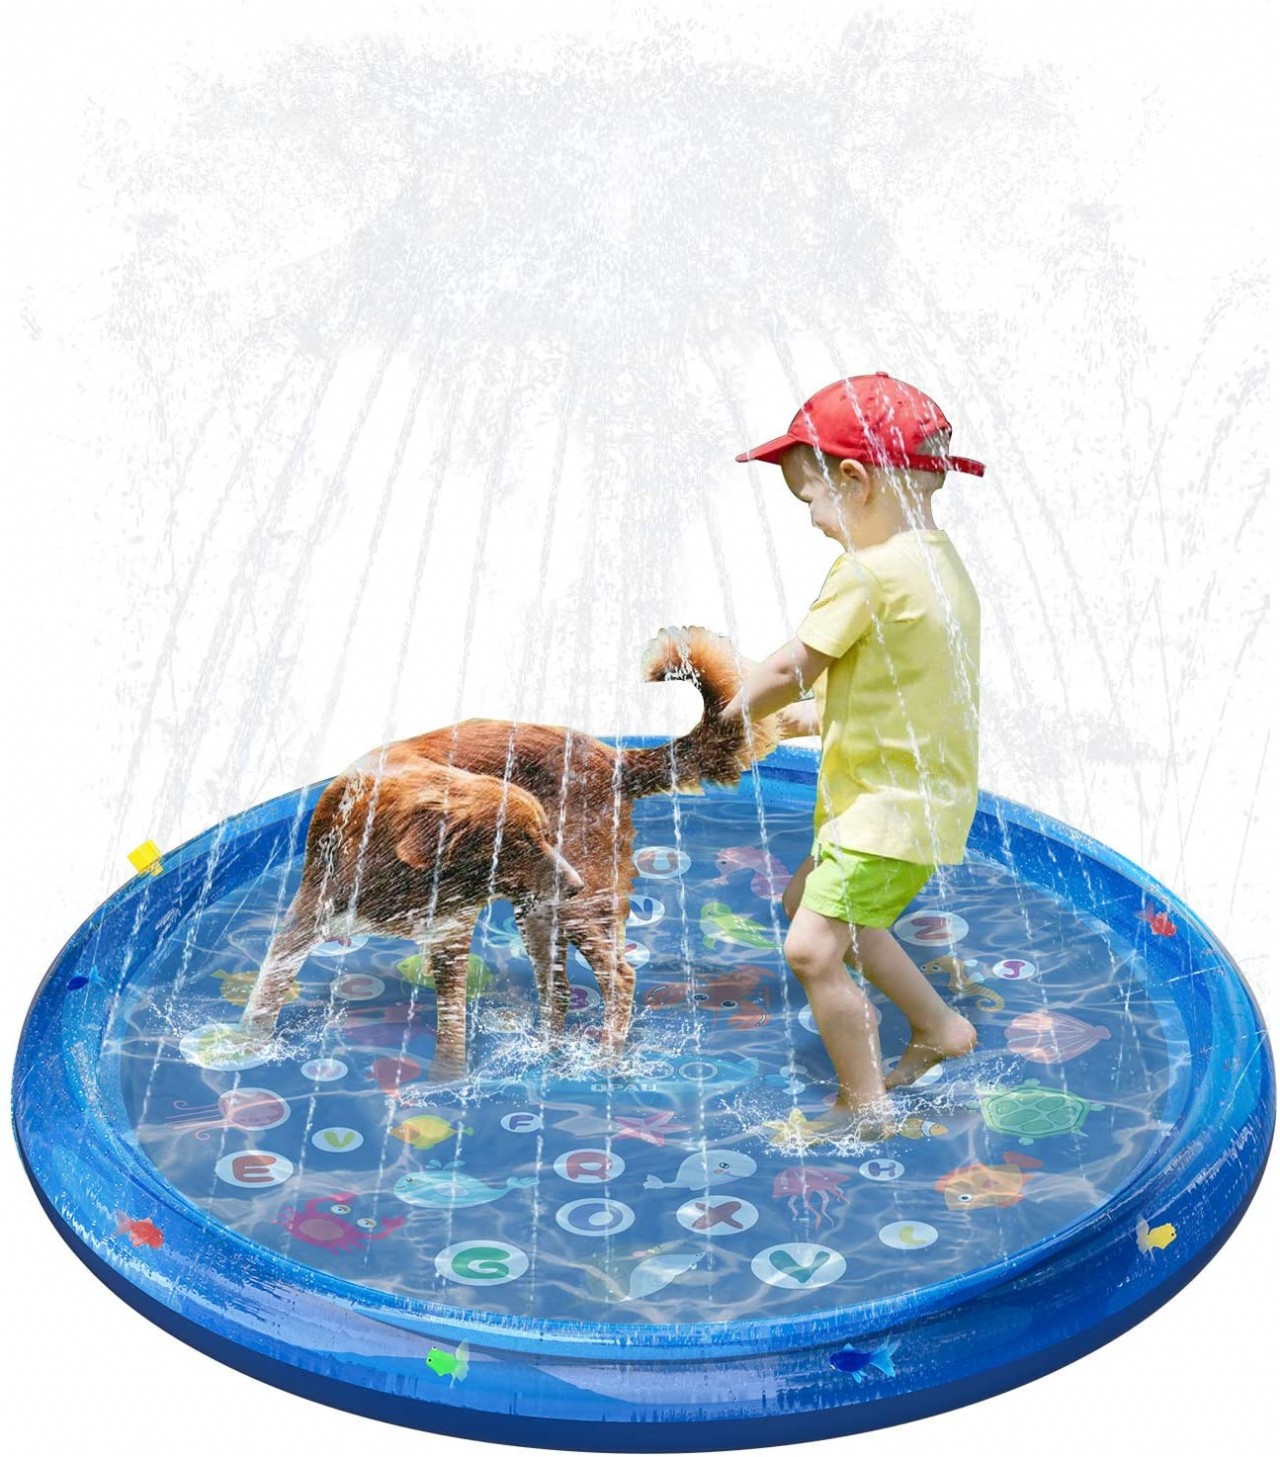 QPAU Sprinkler for Kids, Splash Pad, Baby Pool for Learning, Inflatable Water Toys, 60